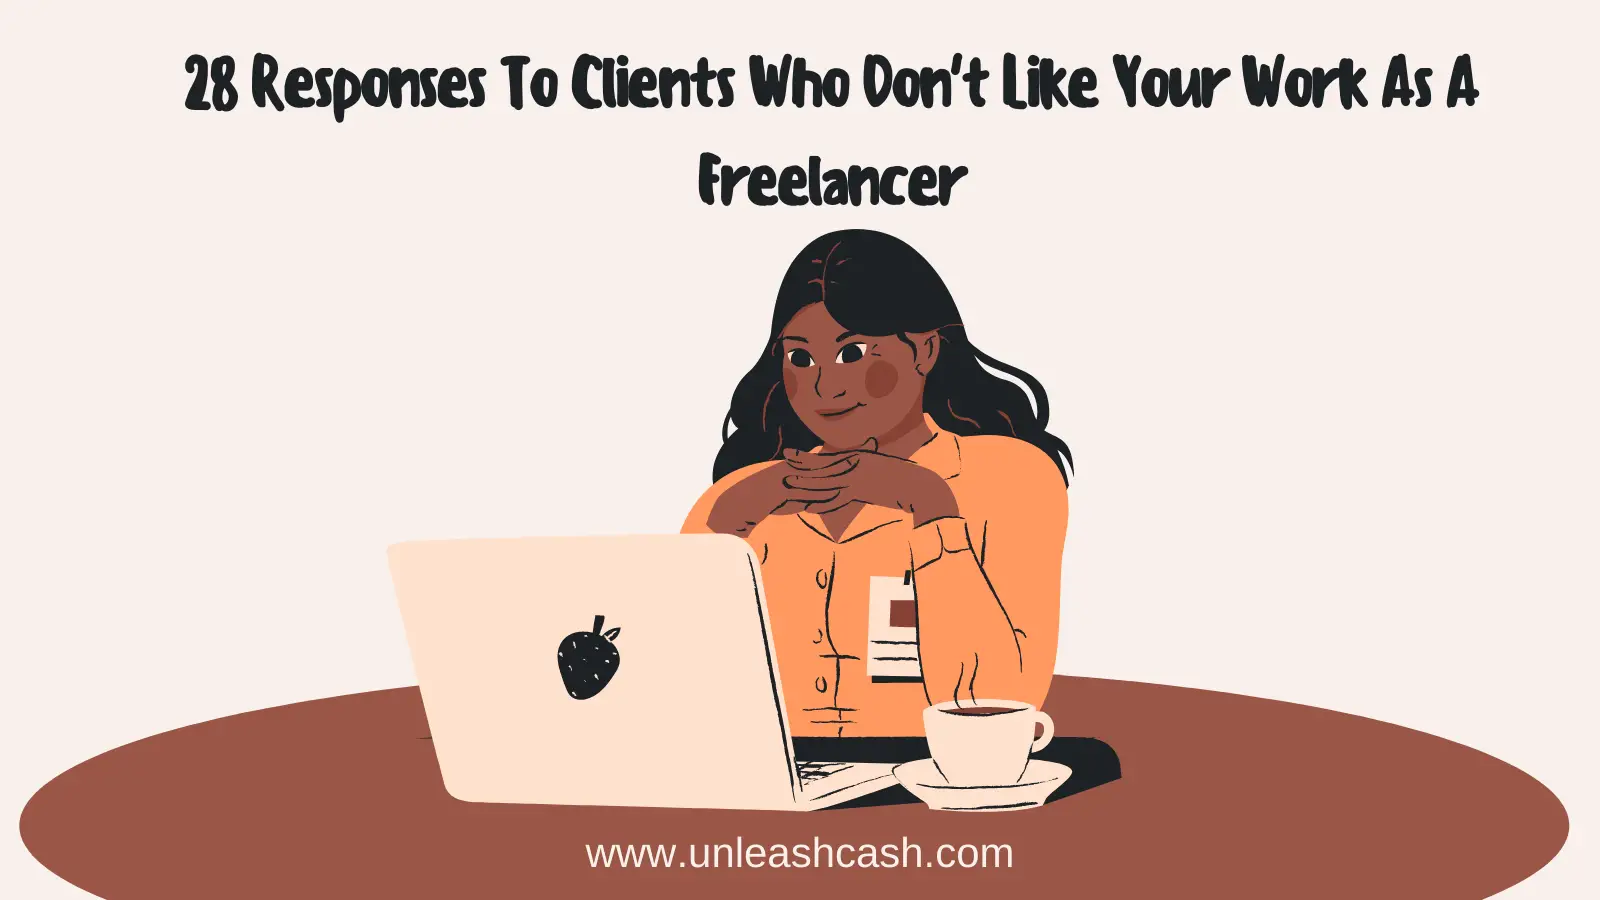 28 Responses To Clients Who Don't Like Your Work As A Freelancer